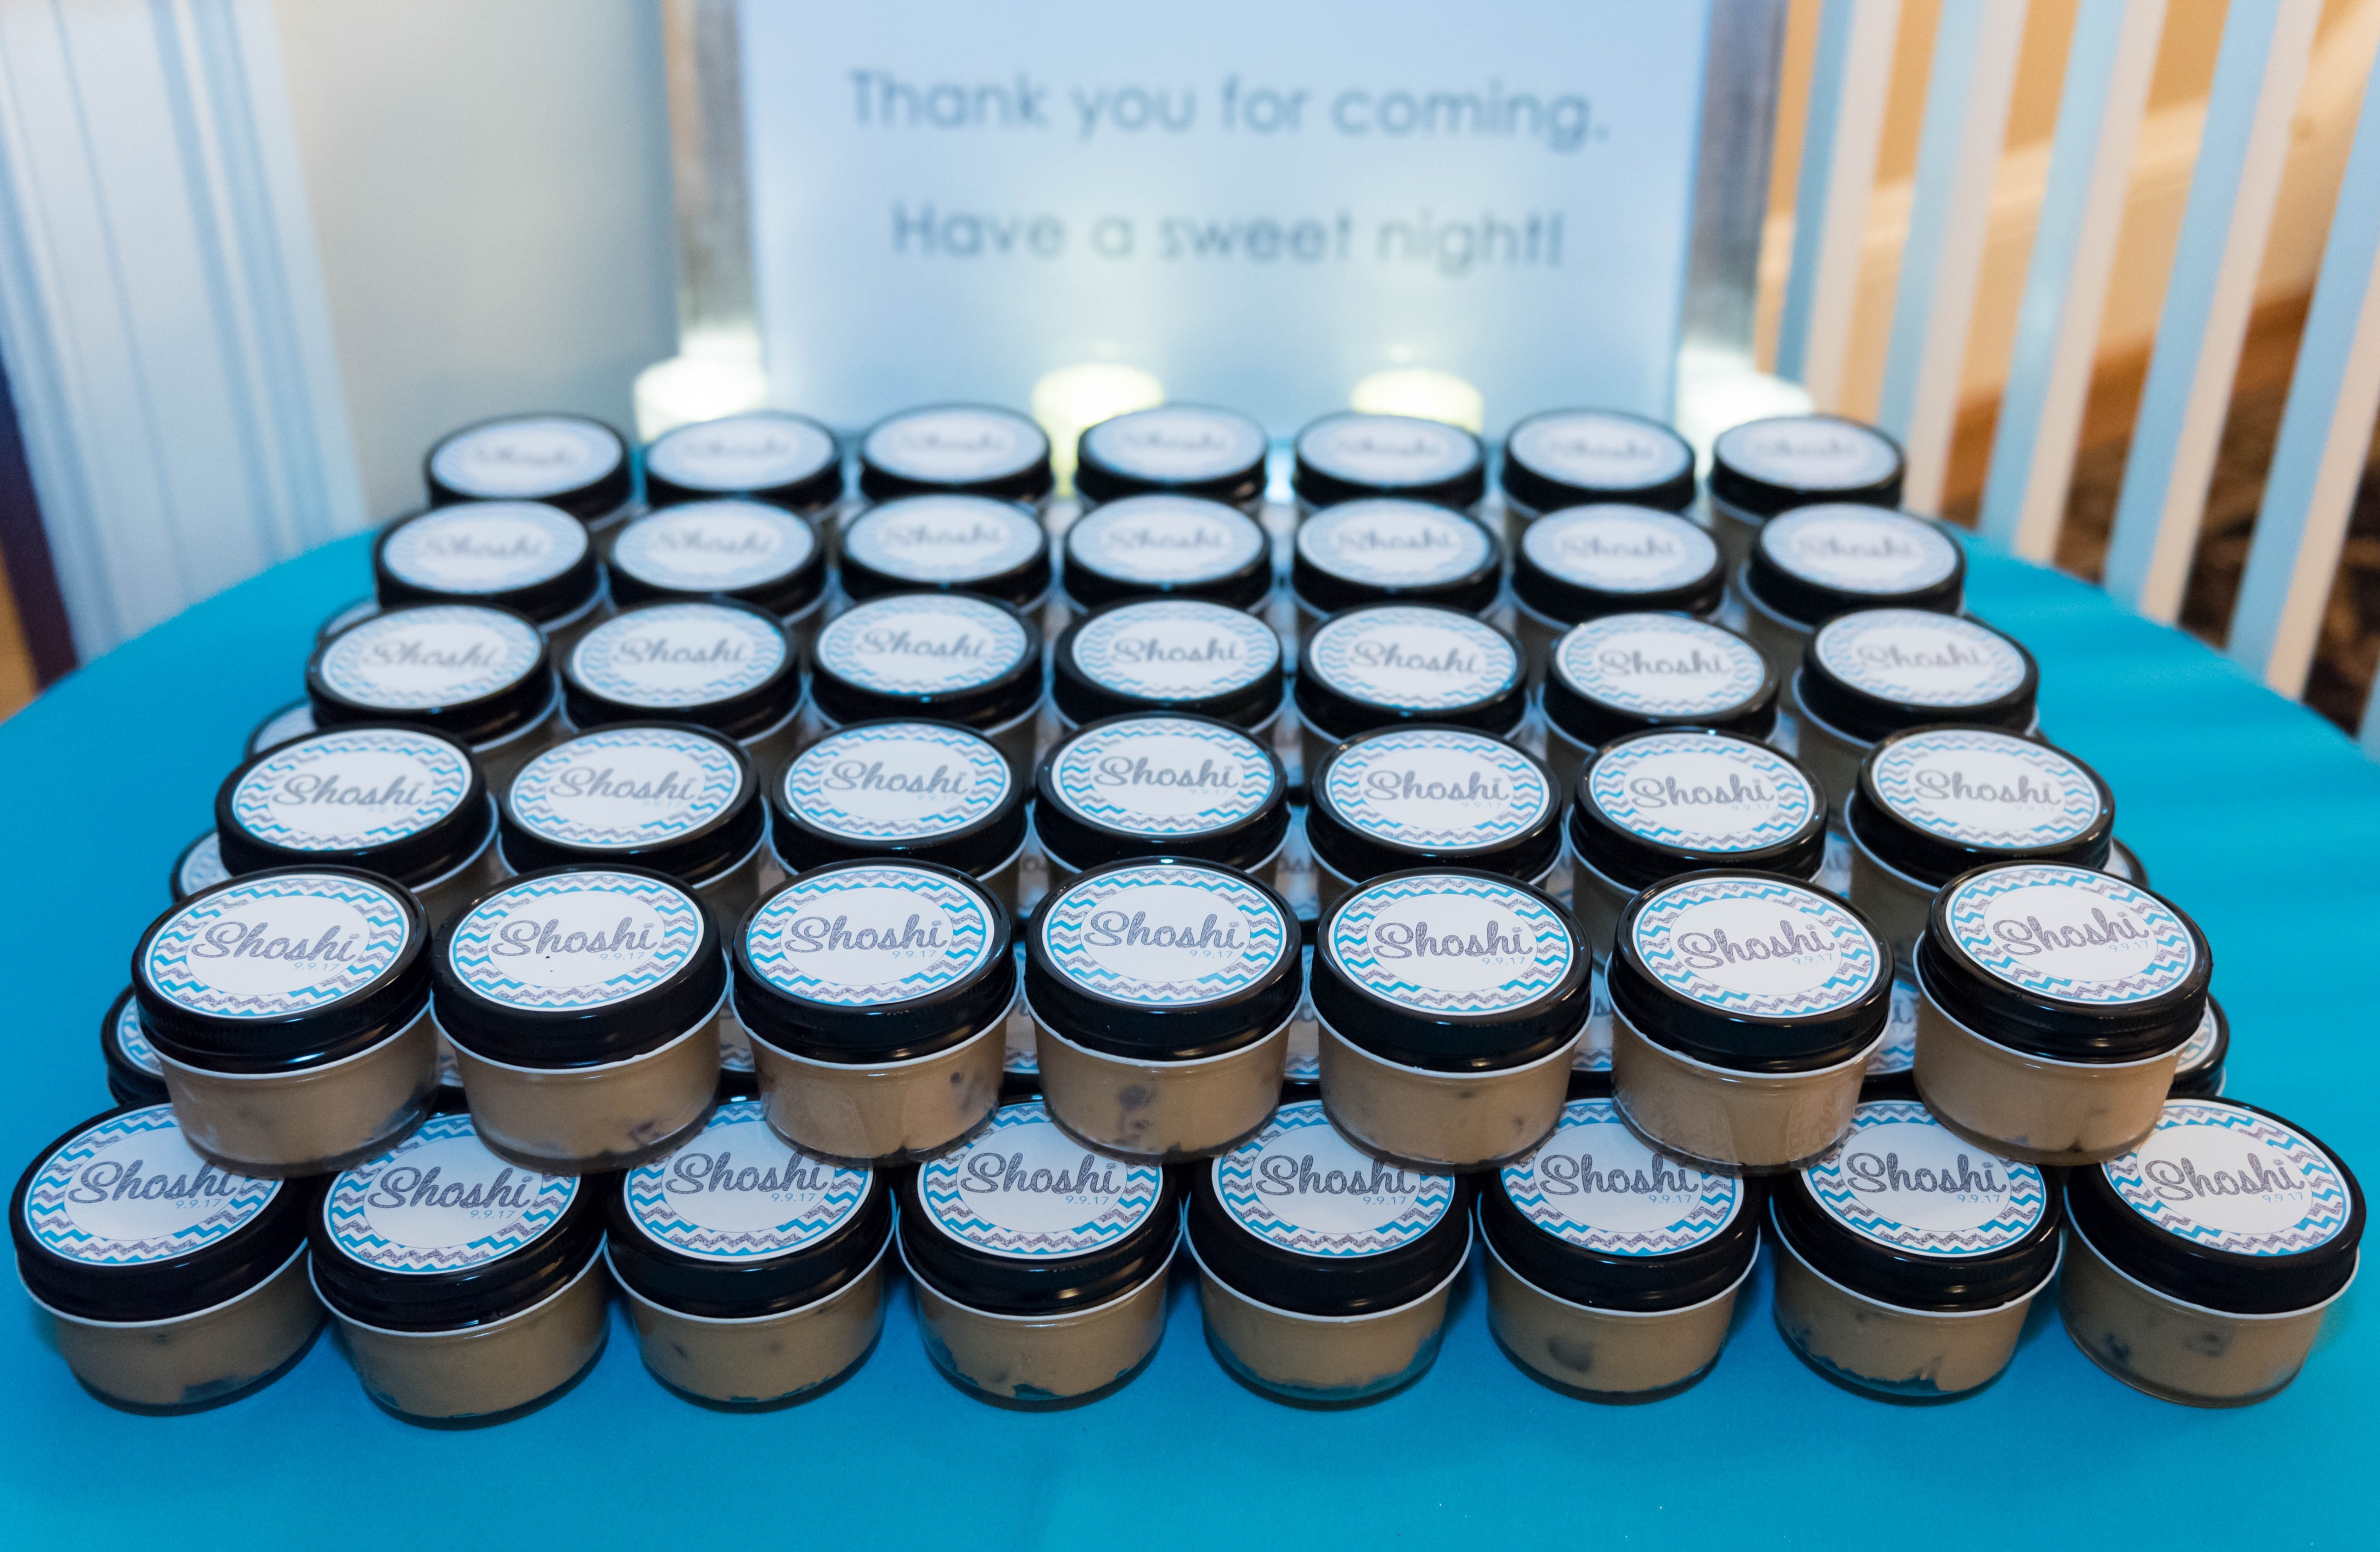 Edible cookie dough jar favors at Shoshana's blue and silver sparkle Bat Mitzvah party at Rock Creek Mansion in Bethesda. | Pop Color Events | Adding a Pop of Color to Bar & Bat Mitzvahs in MD, DC & VA. | Photo by A La Mode Photography